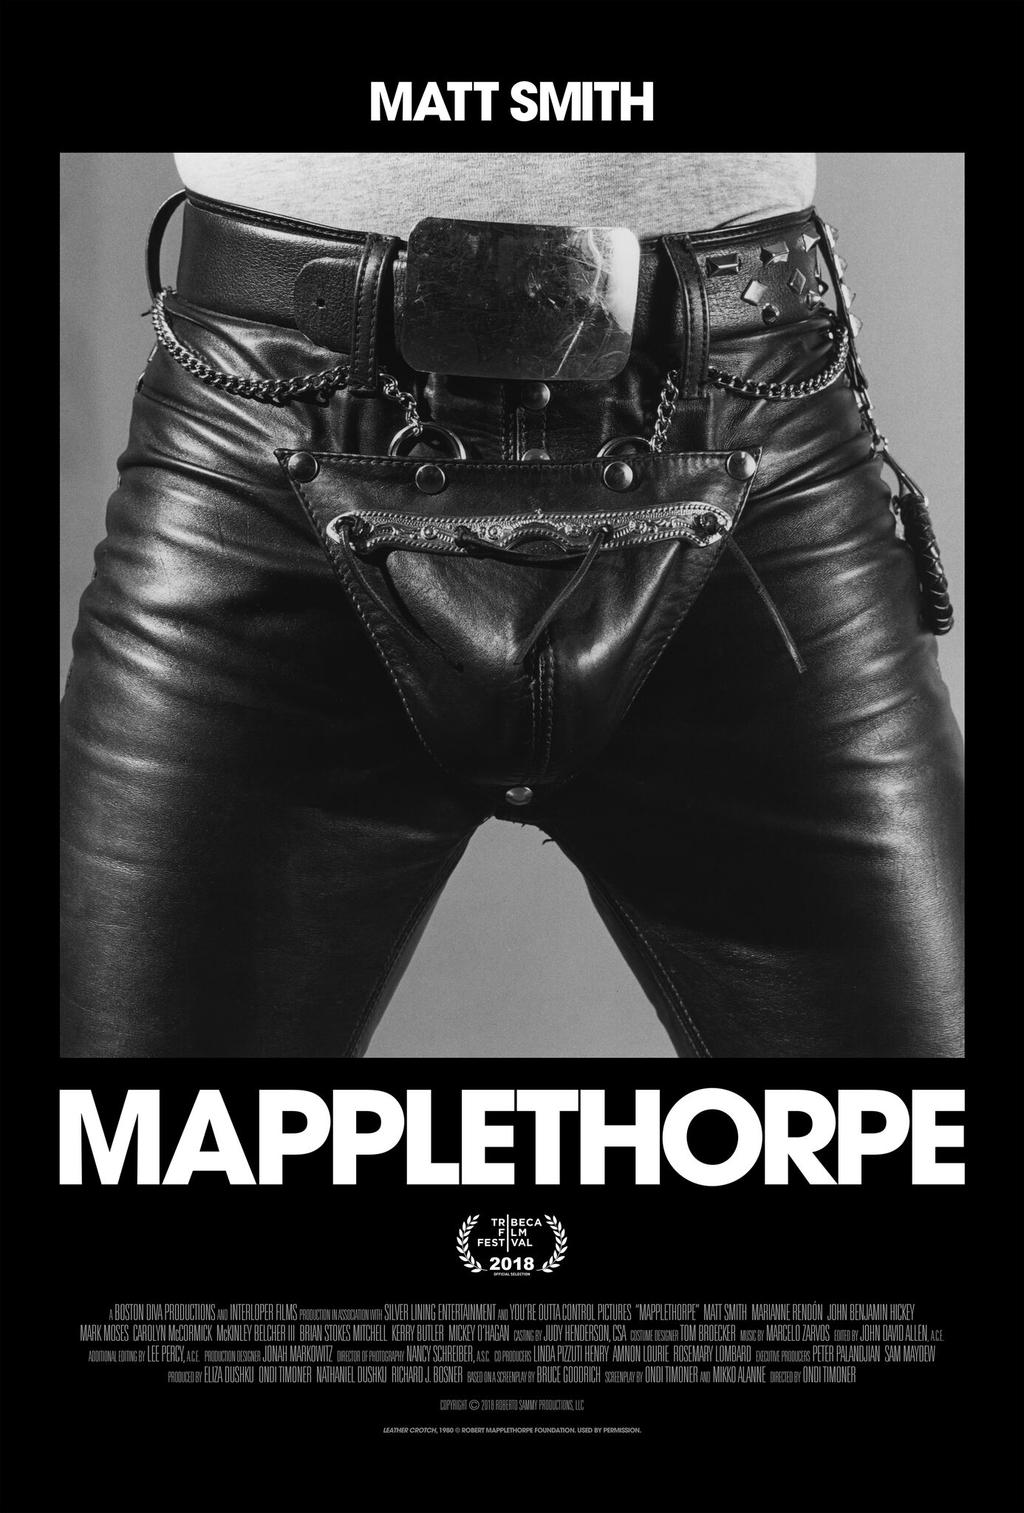 MAPPLETHORPE Directed by Ondi Timoner Starring Matt Smith, Marianne Rendón, John Benjamin Hickey, Brandon Sklenar, McKinley Belcher III, and Mark Moses Made possible with the support of The Robert